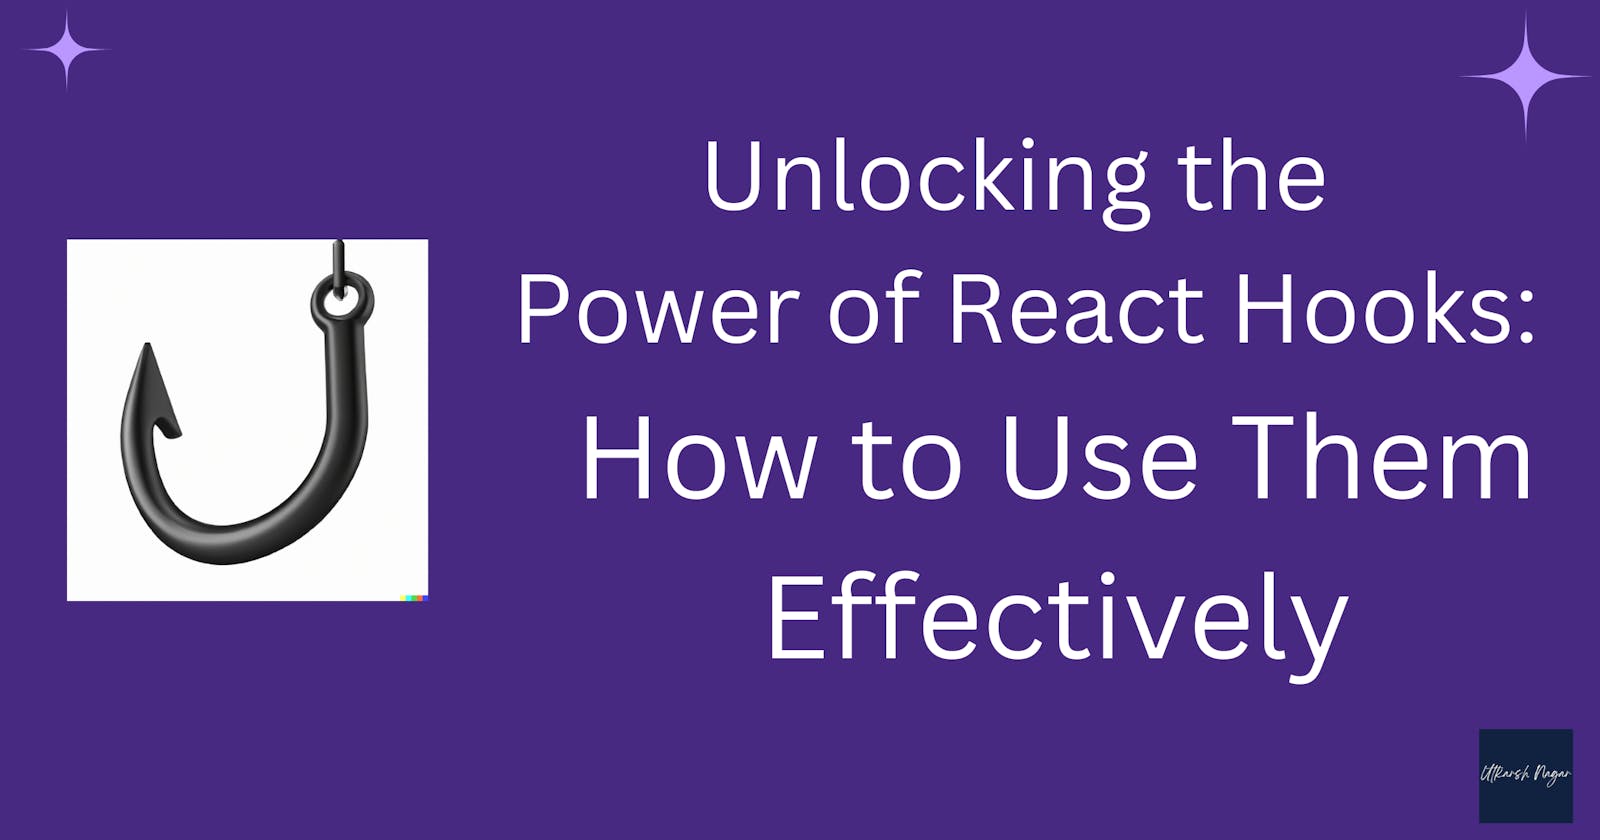 "Unlocking the Power of React Hooks: How to Use Them Effectively"